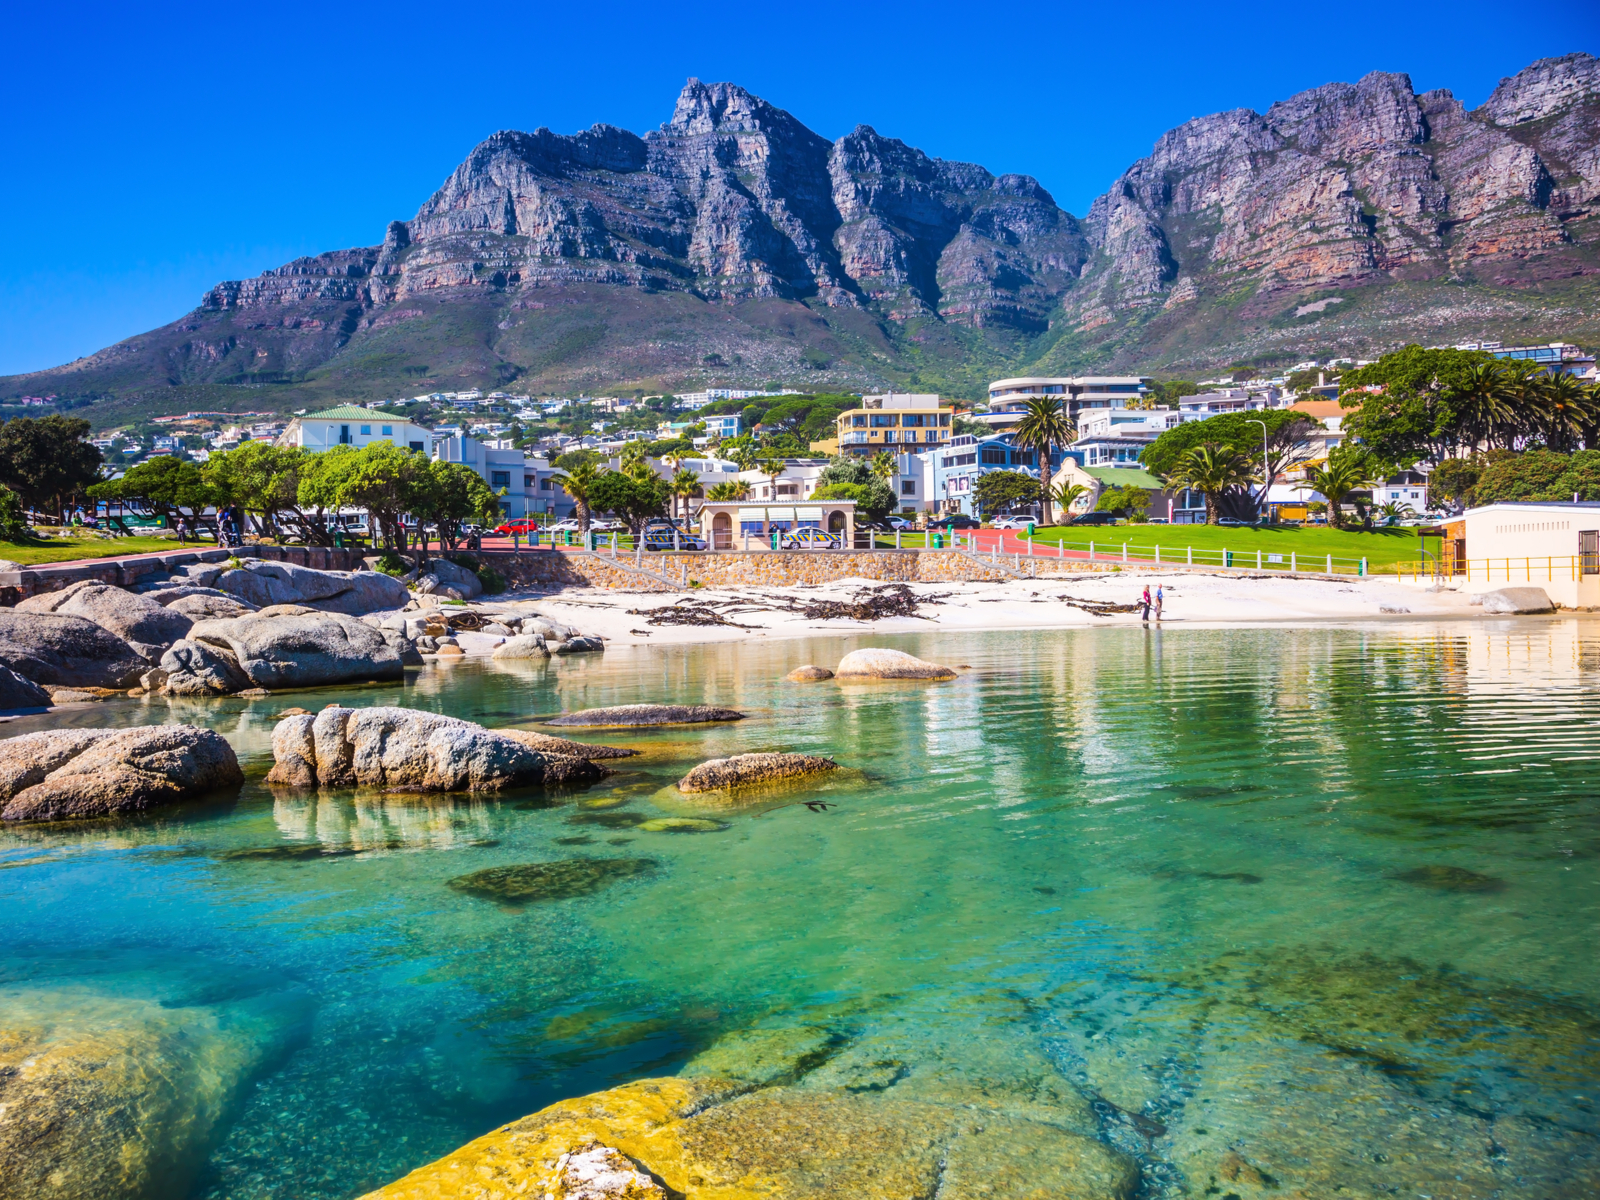 Panoramic view of Cape Town from the bank of a river looking toward the city during the cheapest time to visit South Africa